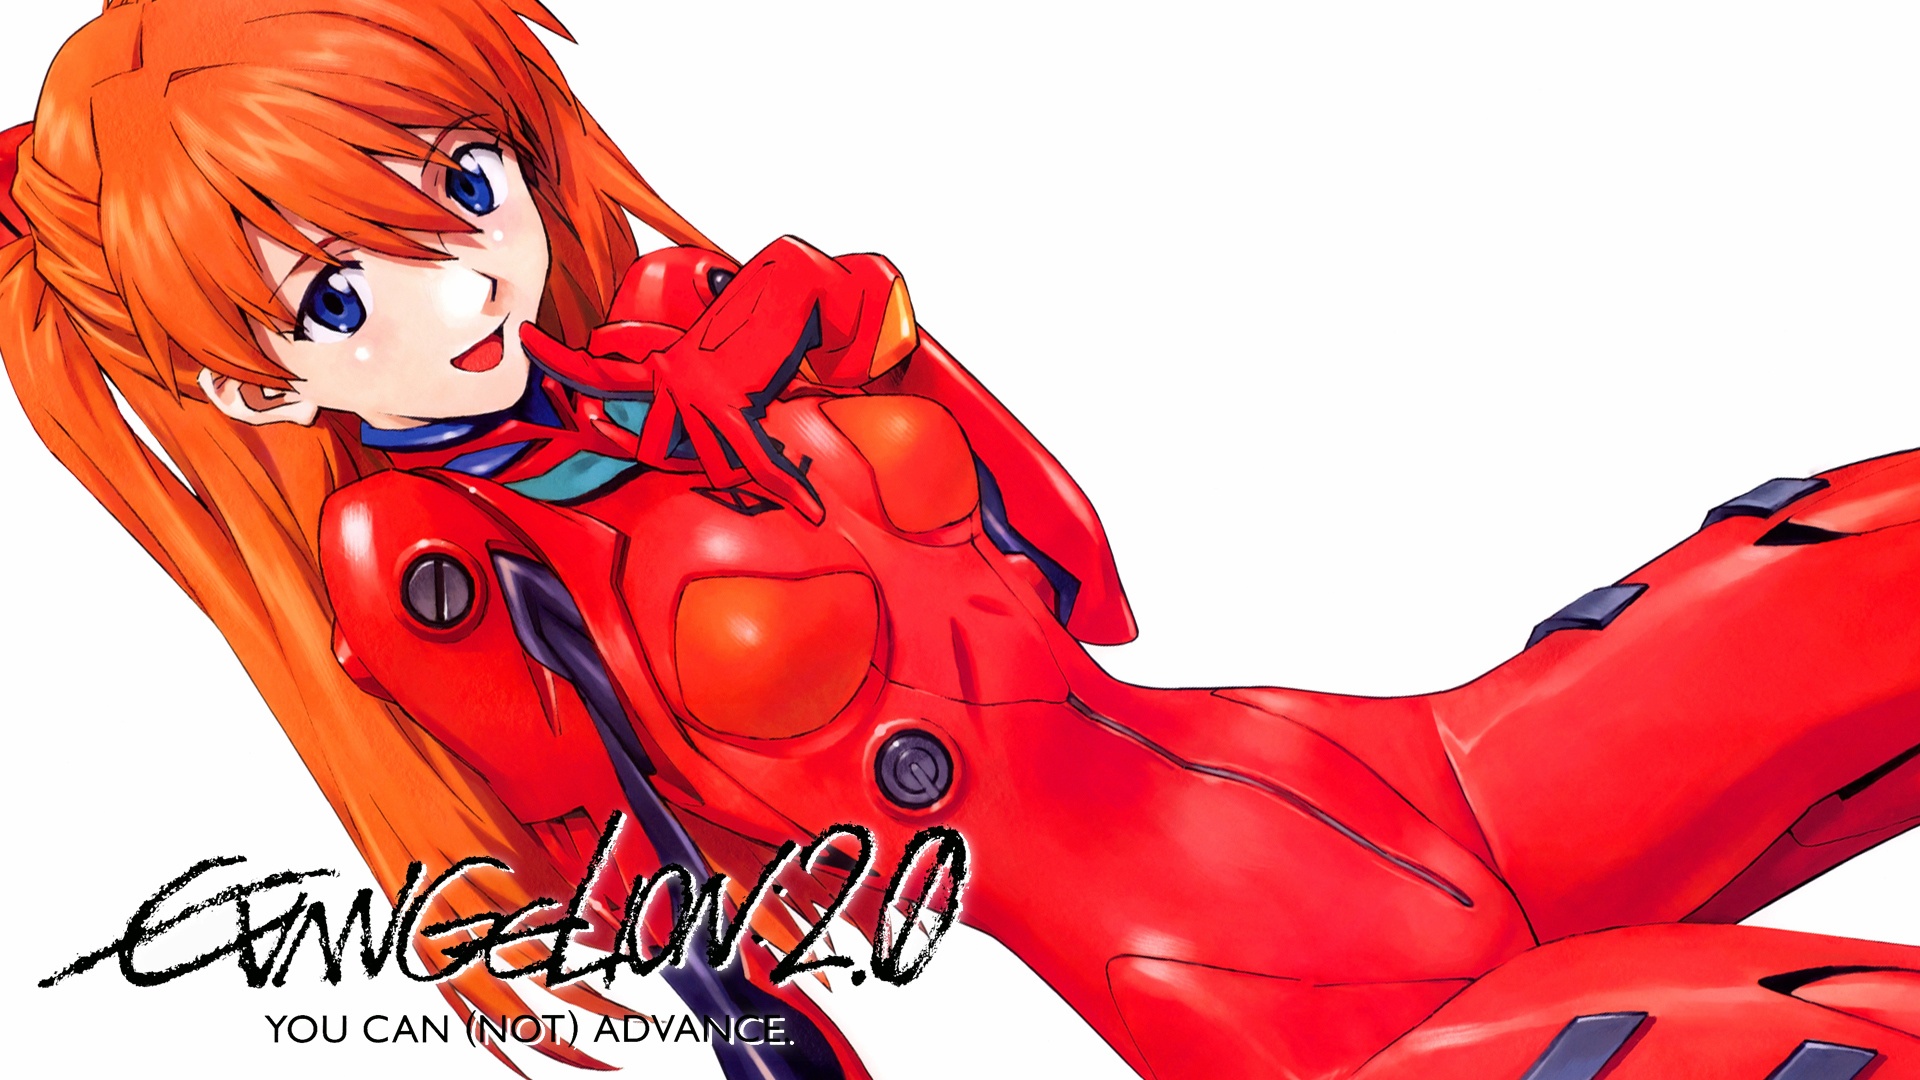 Anime Evangelion: 2.0 You Can (Not) Advance HD Wallpaper | Background Image